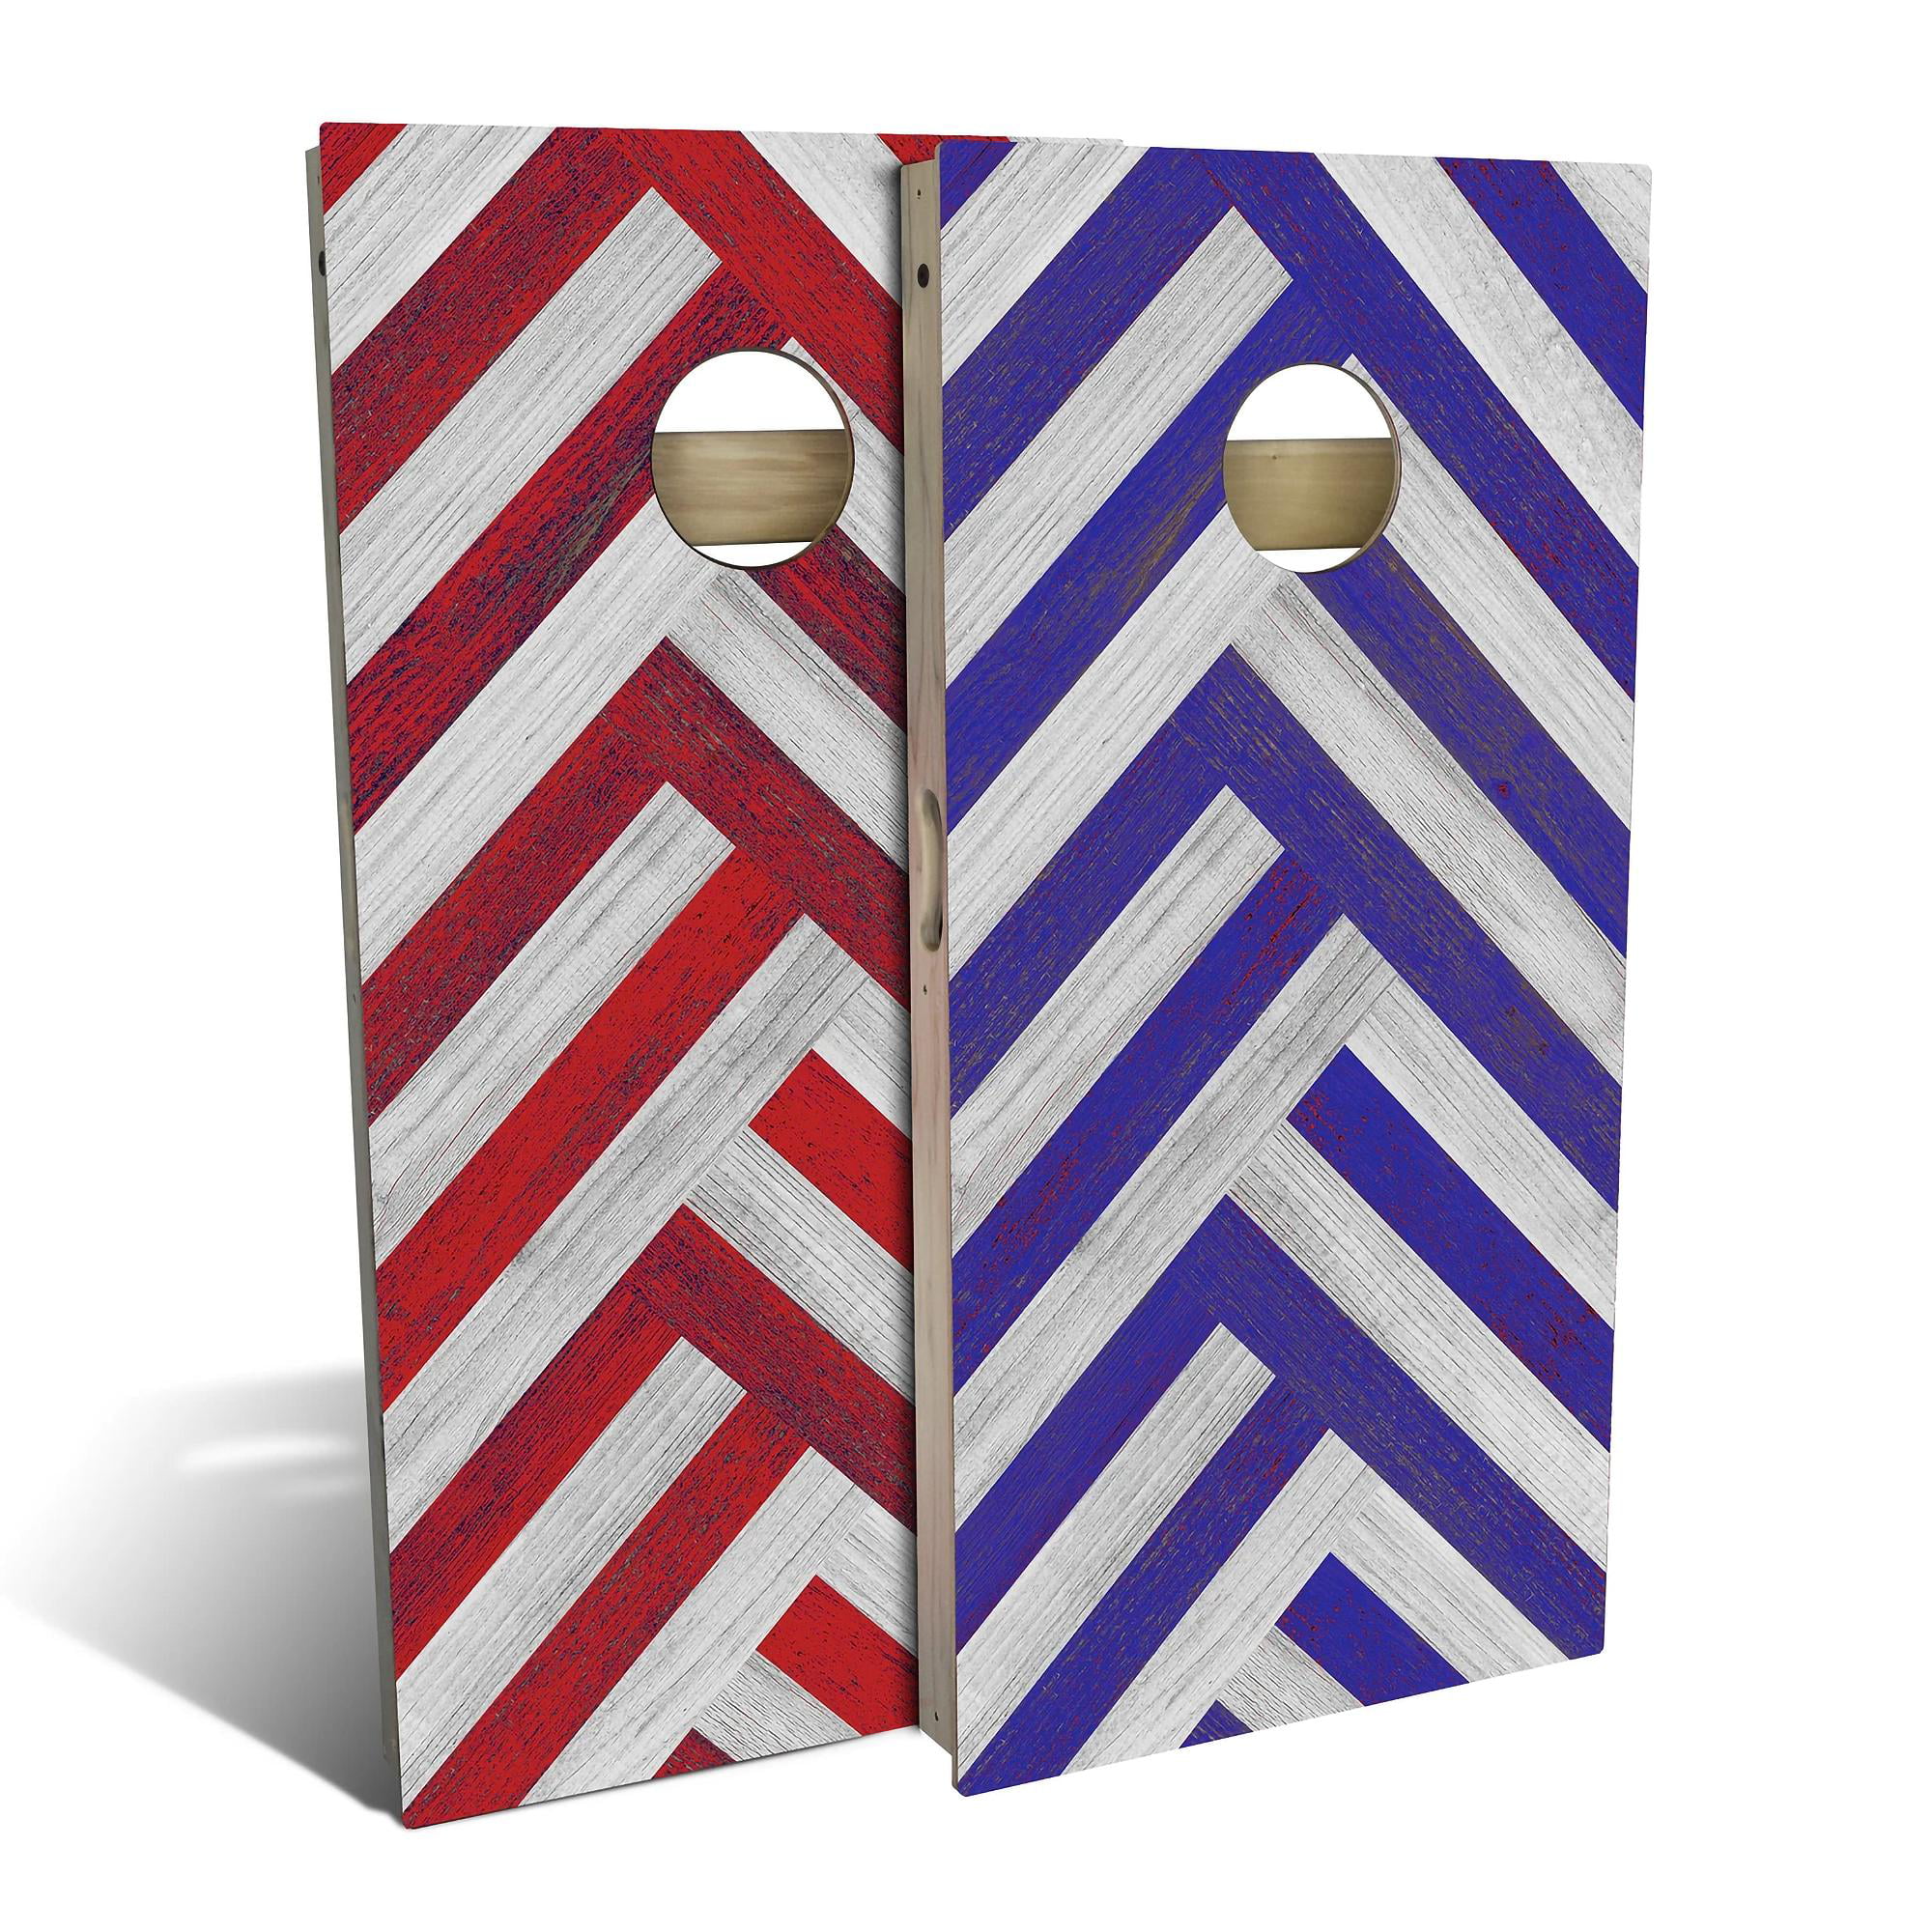 Skip's Garage Red and Blue Cornhole Set, 2 Boards and 8 Bags - Walmart.com